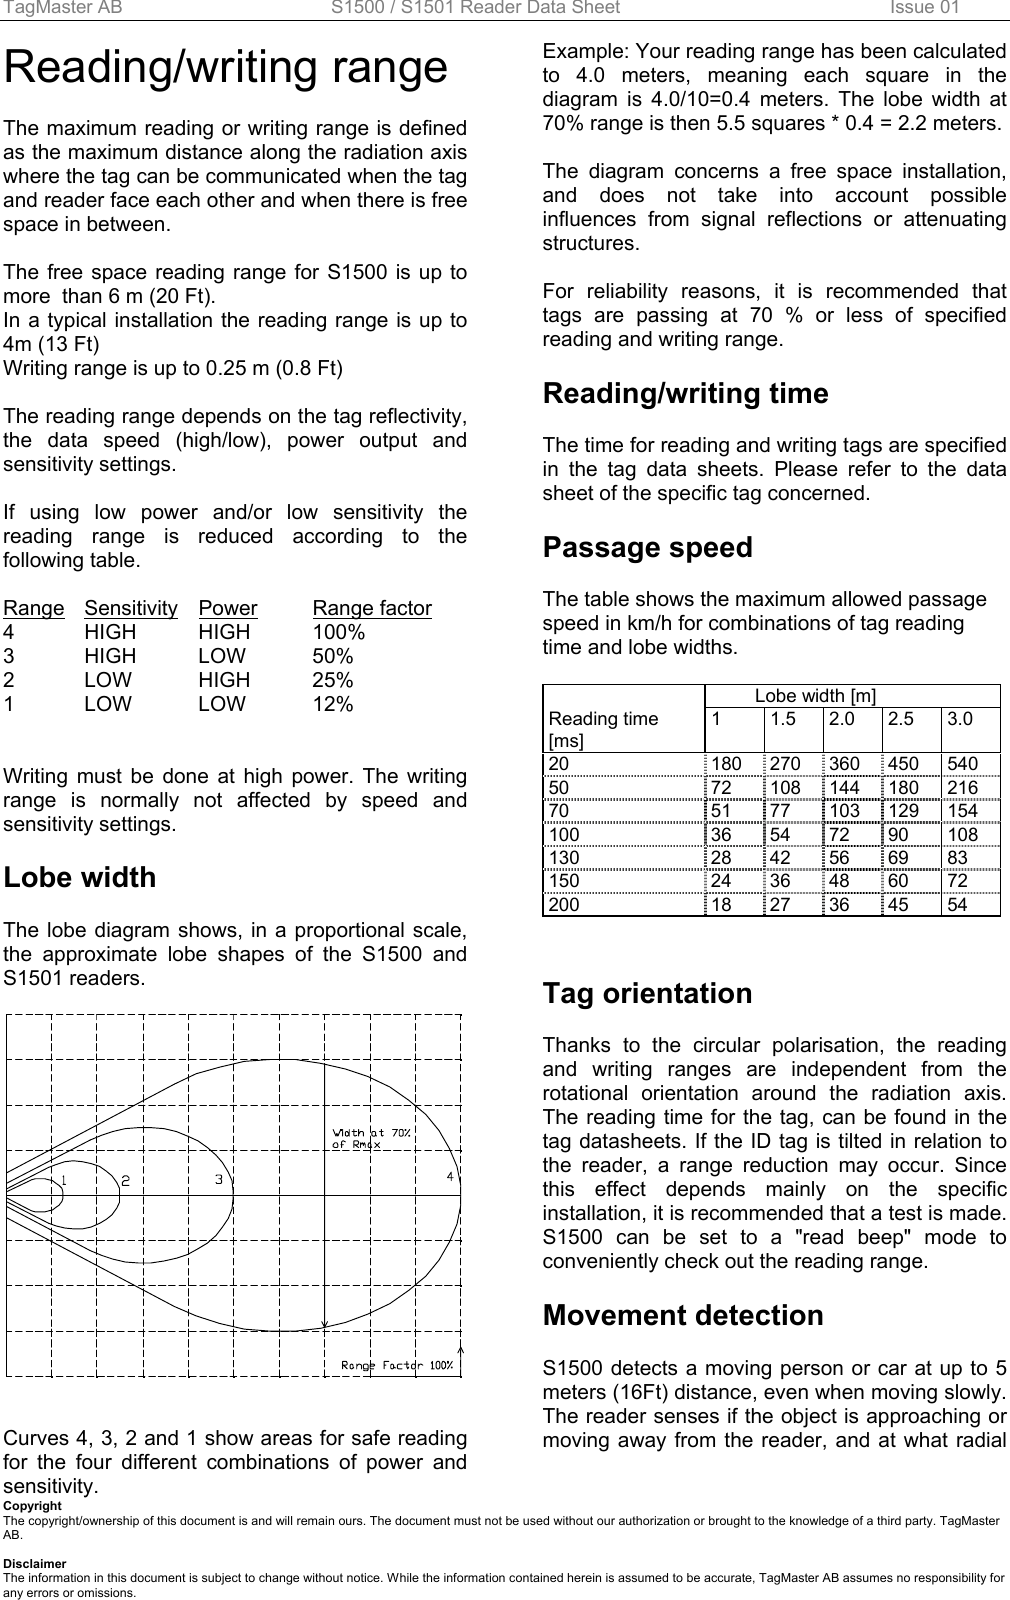 TagMaster AB  S1500 / S1501 Reader Data Sheet        Issue 01 Copyright The copyright/ownership of this document is and will remain ours. The document must not be used without our authorization or brought to the knowledge of a third party. TagMaster AB.  Disclaimer The information in this document is subject to change without notice. While the information contained herein is assumed to be accurate, TagMaster AB assumes no responsibility for any errors or omissions. Reading/writing range  The maximum reading or writing range is defined as the maximum distance along the radiation axis where the tag can be communicated when the tag and reader face each other and when there is free space in between.  The free space reading range for S1500 is up to more  than 6 m (20 Ft). In a typical installation the reading range is up to 4m (13 Ft) Writing range is up to 0.25 m (0.8 Ft)  The reading range depends on the tag reflectivity, the data speed (high/low), power output and sensitivity settings.   If using low power and/or low sensitivity the reading range is reduced according to the following table.  Range Sensitivity Power Range factor 4 HIGH HIGH 100% 3 HIGH LOW 50% 2 LOW HIGH 25% 1 LOW LOW 12%   Writing must be done at high power. The writing range is normally not affected by speed and sensitivity settings.  Lobe width  The lobe diagram shows, in a proportional scale, the approximate lobe shapes of the S1500 and S1501 readers.     Curves 4, 3, 2 and 1 show areas for safe reading for the four different combinations of power and sensitivity.  Example: Your reading range has been calculated to 4.0 meters, meaning each square in the diagram is 4.0/10=0.4 meters. The lobe width at 70% range is then 5.5 squares * 0.4 = 2.2 meters.  The diagram concerns a free space installation, and does not take into account possible influences from signal reflections or attenuating structures.  For reliability reasons, it is recommended that tags are passing at 70 % or less of specified reading and writing range.  Reading/writing time  The time for reading and writing tags are specified in the tag data sheets. Please refer to the data sheet of the specific tag concerned.  Passage speed  The table shows the maximum allowed passage speed in km/h for combinations of tag reading time and lobe widths.    Lobe width [m]         Reading time [ms] 1 1.5 2.0 2.5 3.0 20  180 270 360 450 540 50 72 108 144 180 216 70 51 77 103 129 154 100  36 54 72 90 108 130  28 42 56 69 83 150  24 36 48 60 72 200  18 27 36 45 54   Tag orientation  Thanks to the circular polarisation, the reading and writing ranges are independent from the rotational orientation around the radiation axis. The reading time for the tag, can be found in the tag datasheets. If the ID tag is tilted in relation to the reader, a range reduction may occur. Since this effect depends mainly on the specific installation, it is recommended that a test is made. S1500 can be set to a &quot;read beep&quot; mode to conveniently check out the reading range.  Movement detection   S1500 detects a moving person or car at up to 5 meters (16Ft) distance, even when moving slowly. The reader senses if the object is approaching or moving away from the reader, and at what radial 